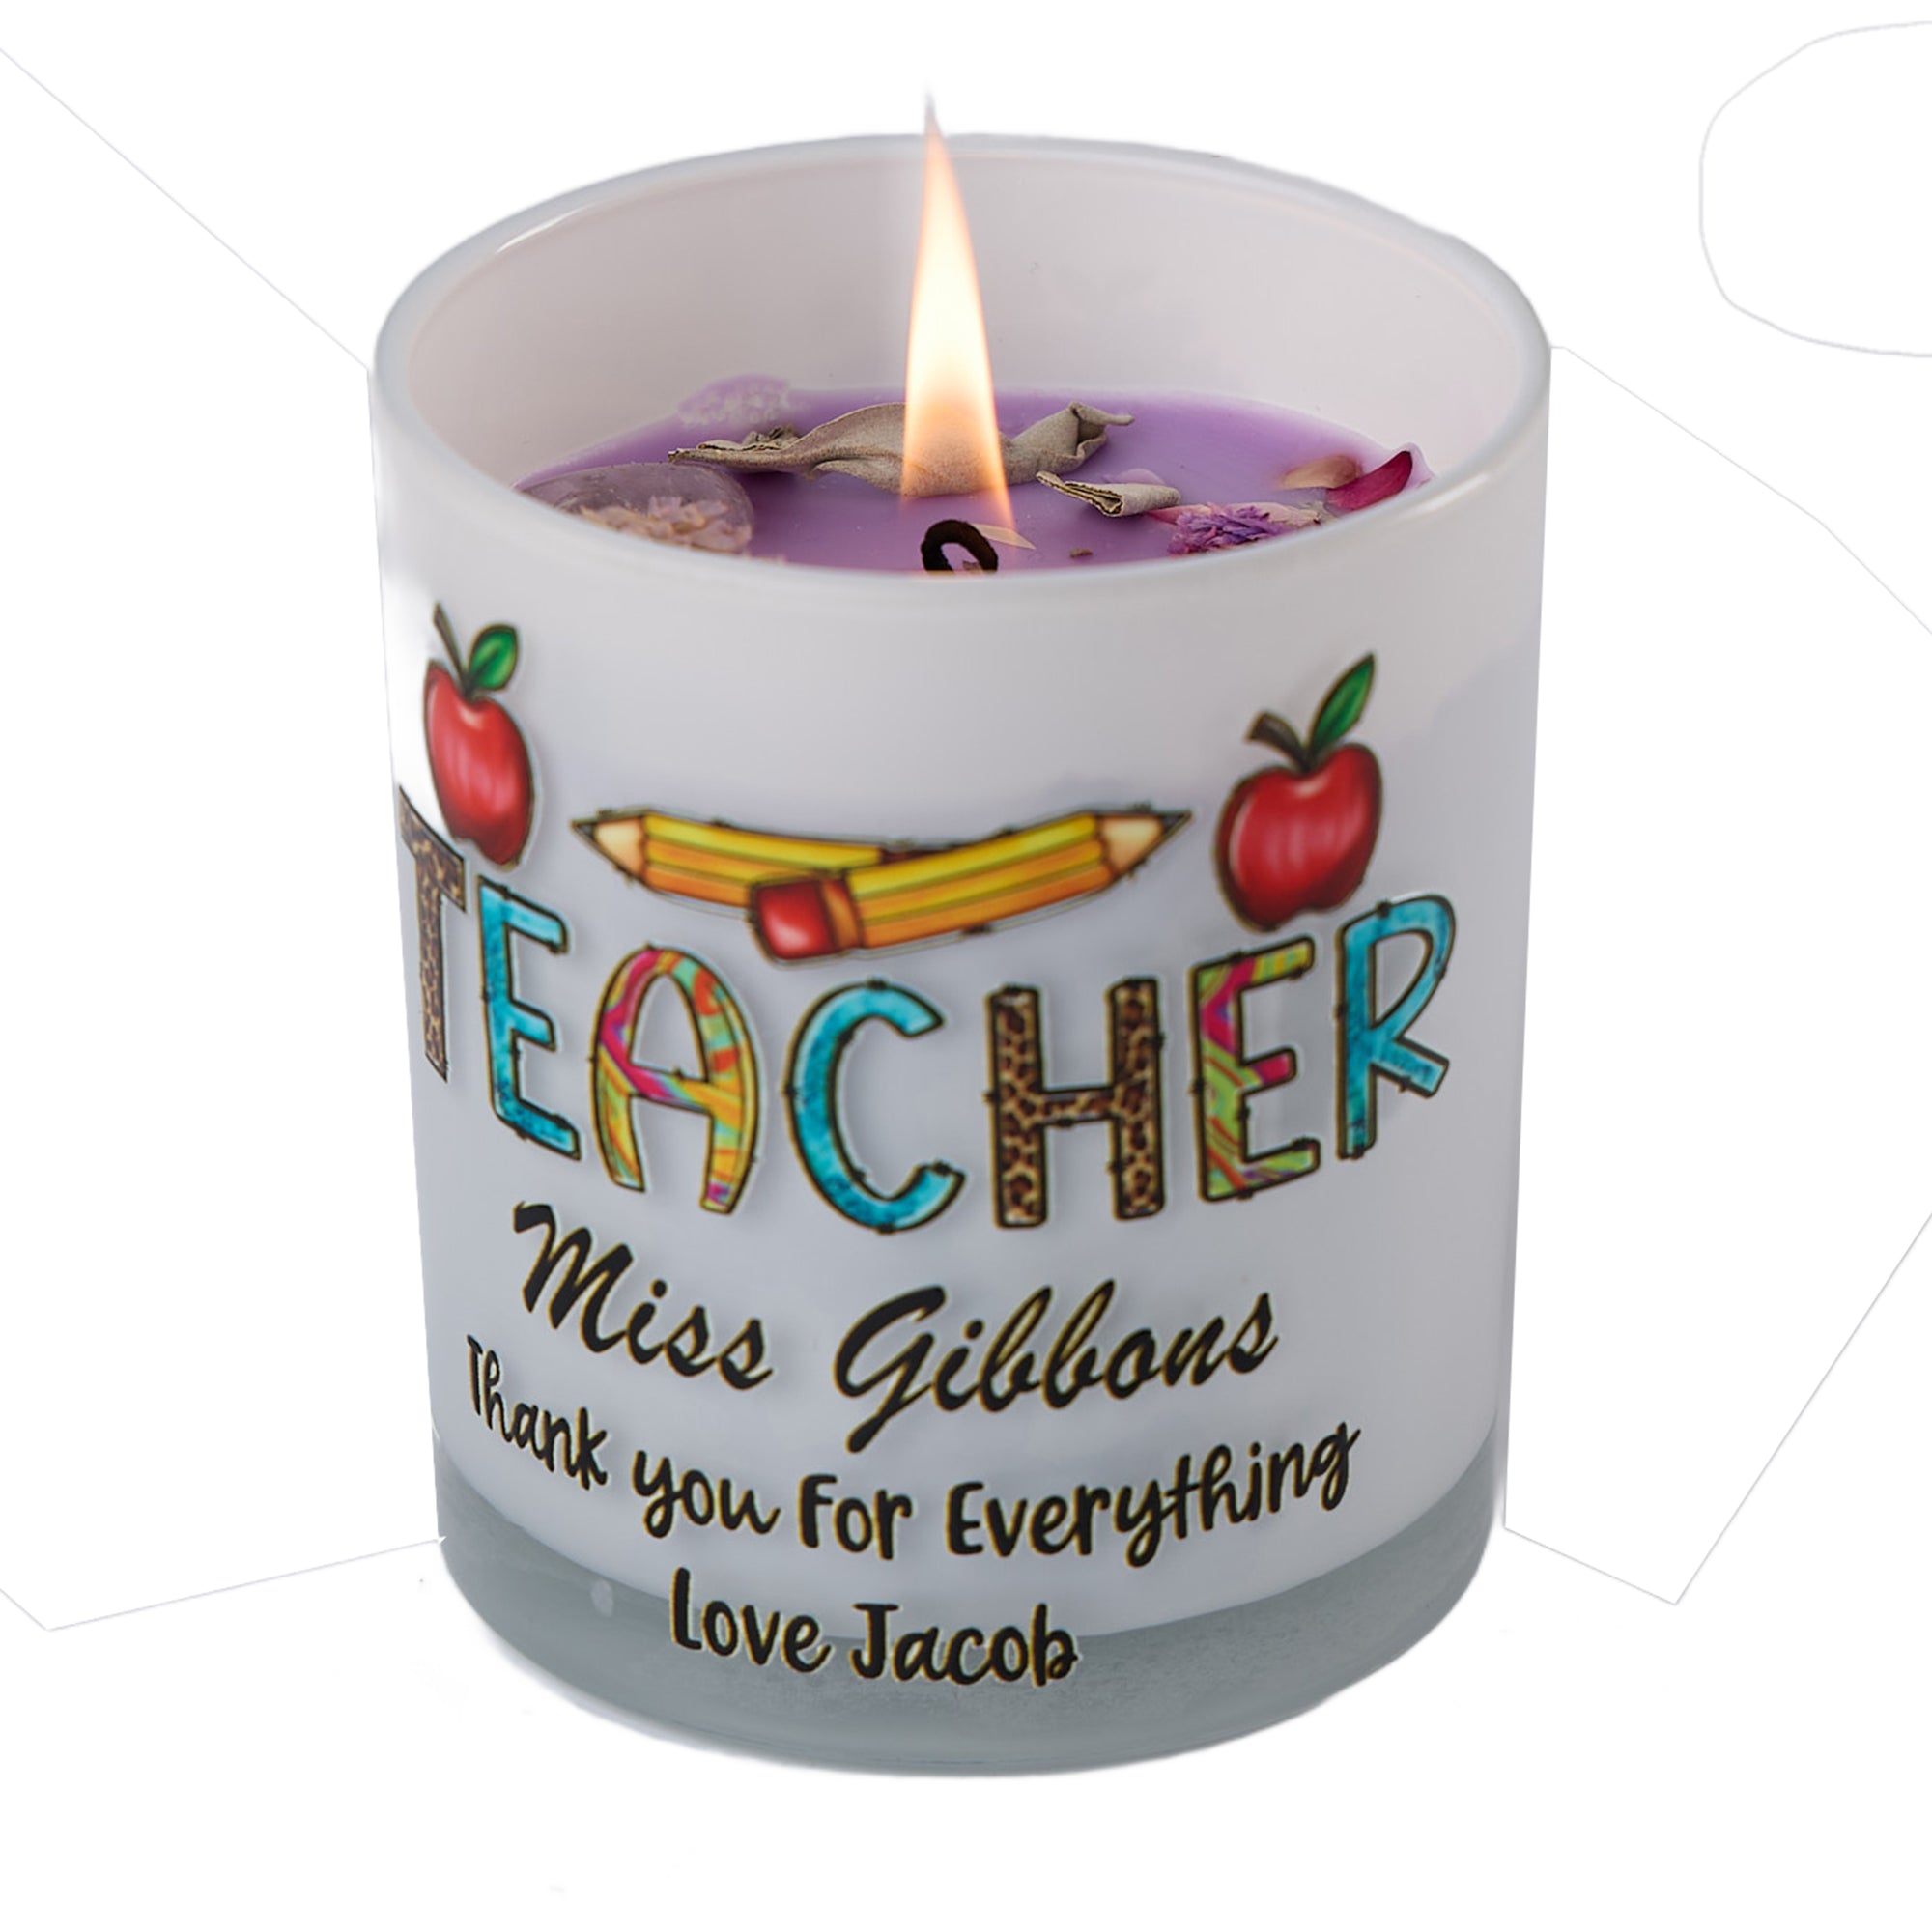 Beautiful Embellished Teacher Candle Jar Gift With Apple and Pencil